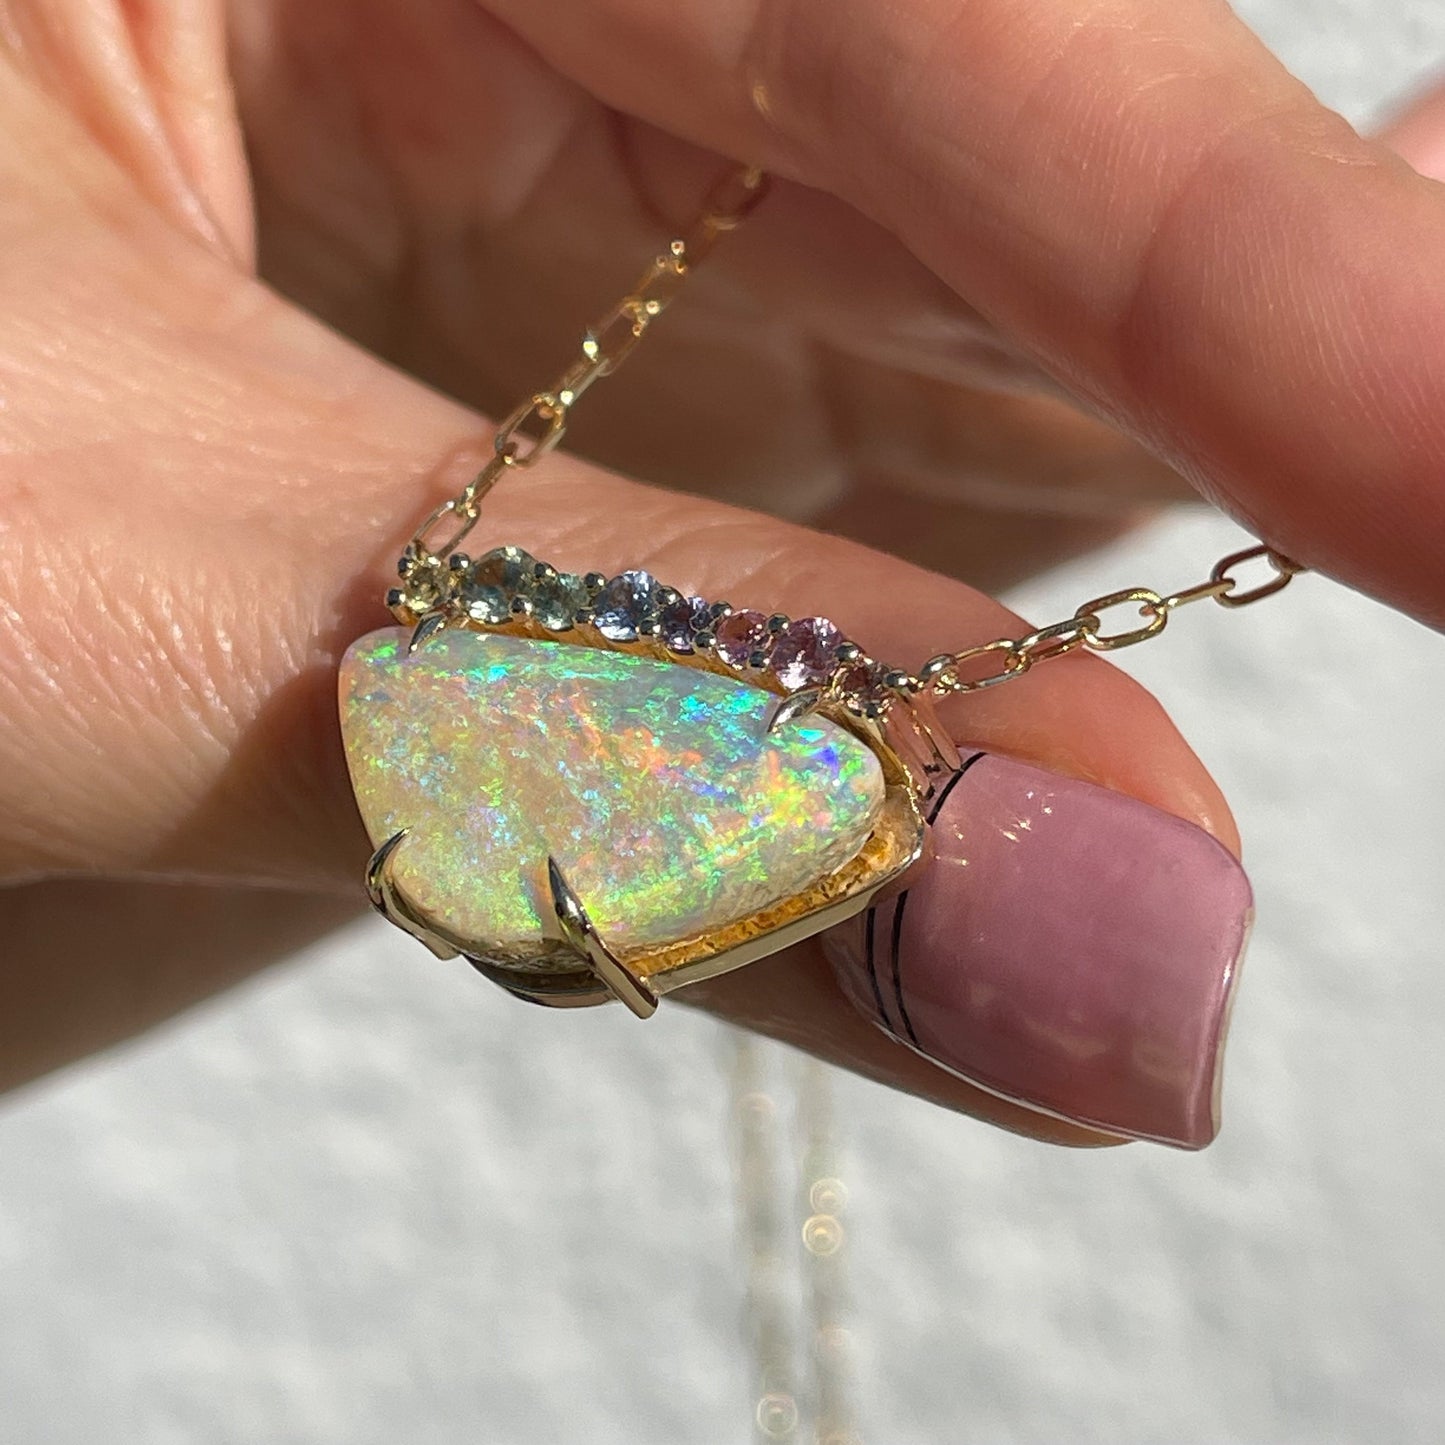 An Australian Opal Necklace by NIXIN Jewelry. The Crystal Opal necklace is set in gold and shot at an angle to show the side of the necklace as it rests on a finger.